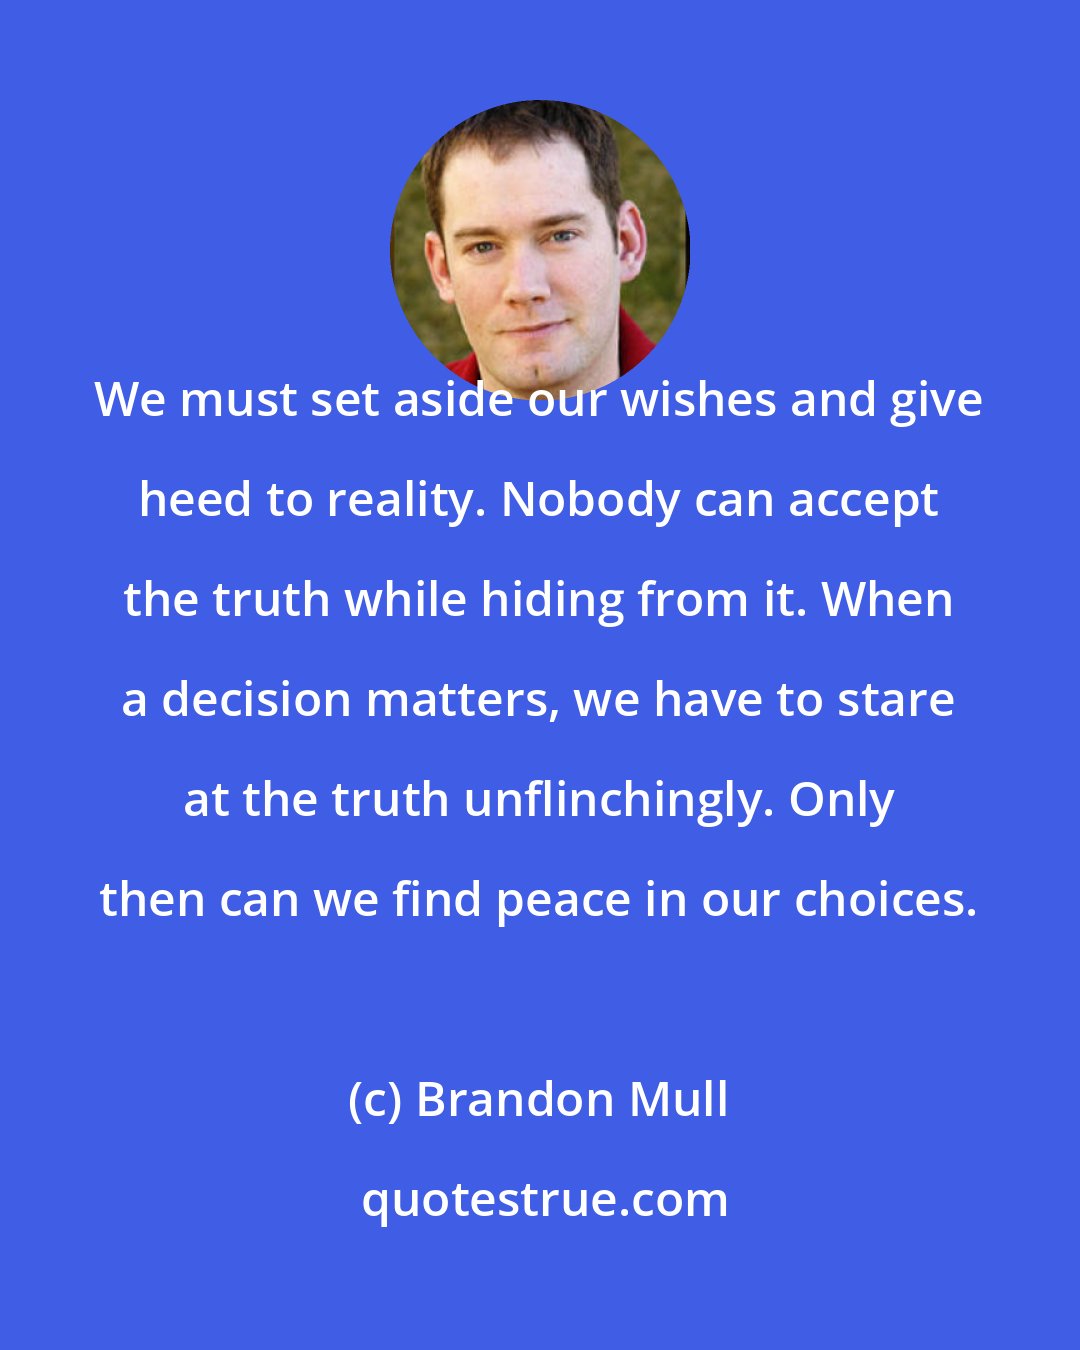 Brandon Mull: We must set aside our wishes and give heed to reality. Nobody can accept the truth while hiding from it. When a decision matters, we have to stare at the truth unflinchingly. Only then can we find peace in our choices.